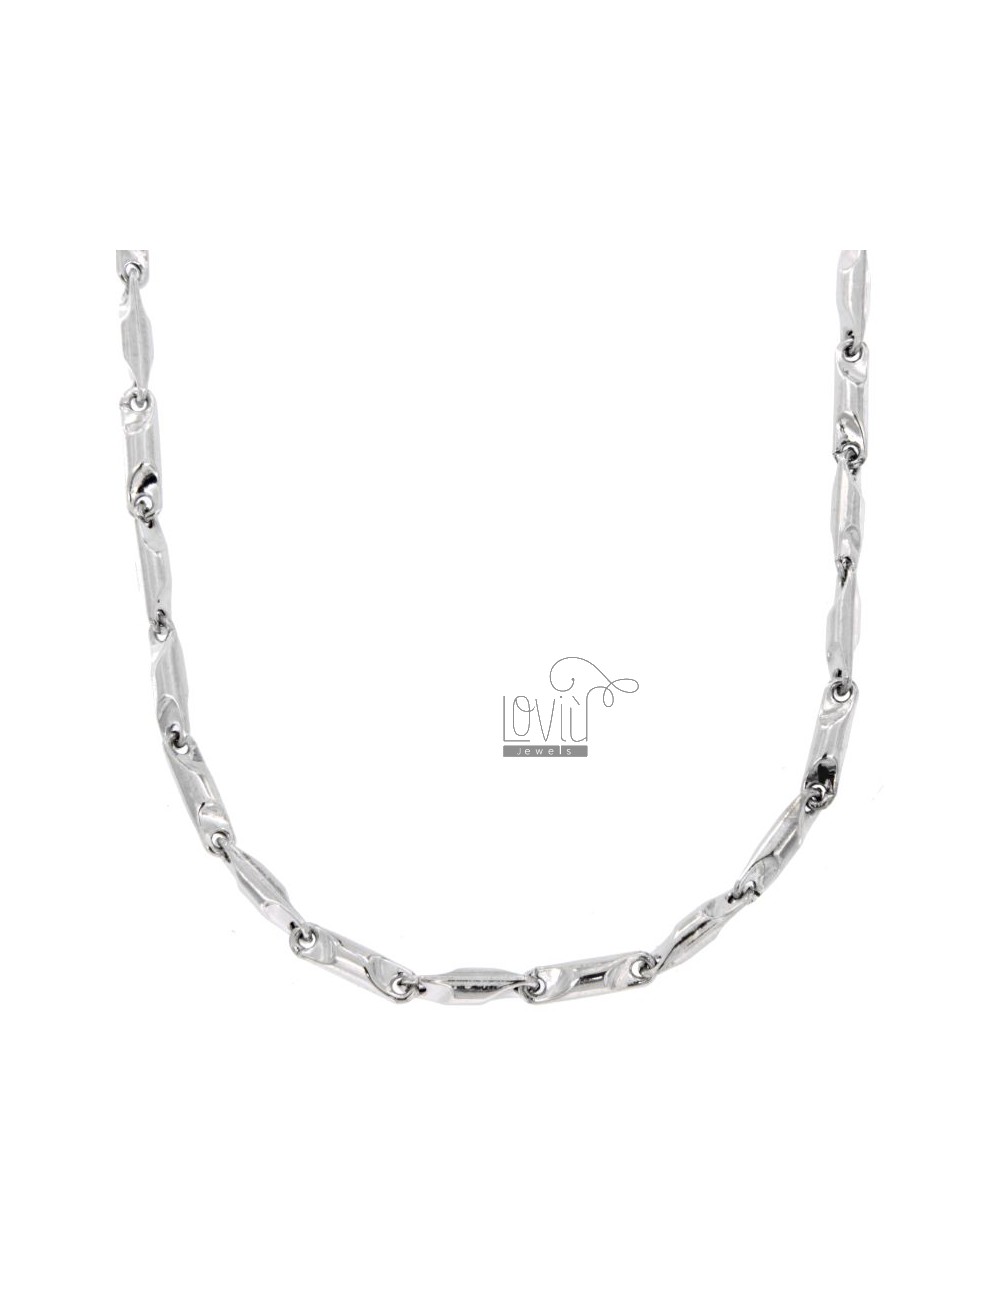 Buy Necklace Man Sweater Segment Mm 4 Cm 50 In Rhodium Ag Tit 925 Necklaces For Men Loviu Jewels By White Label